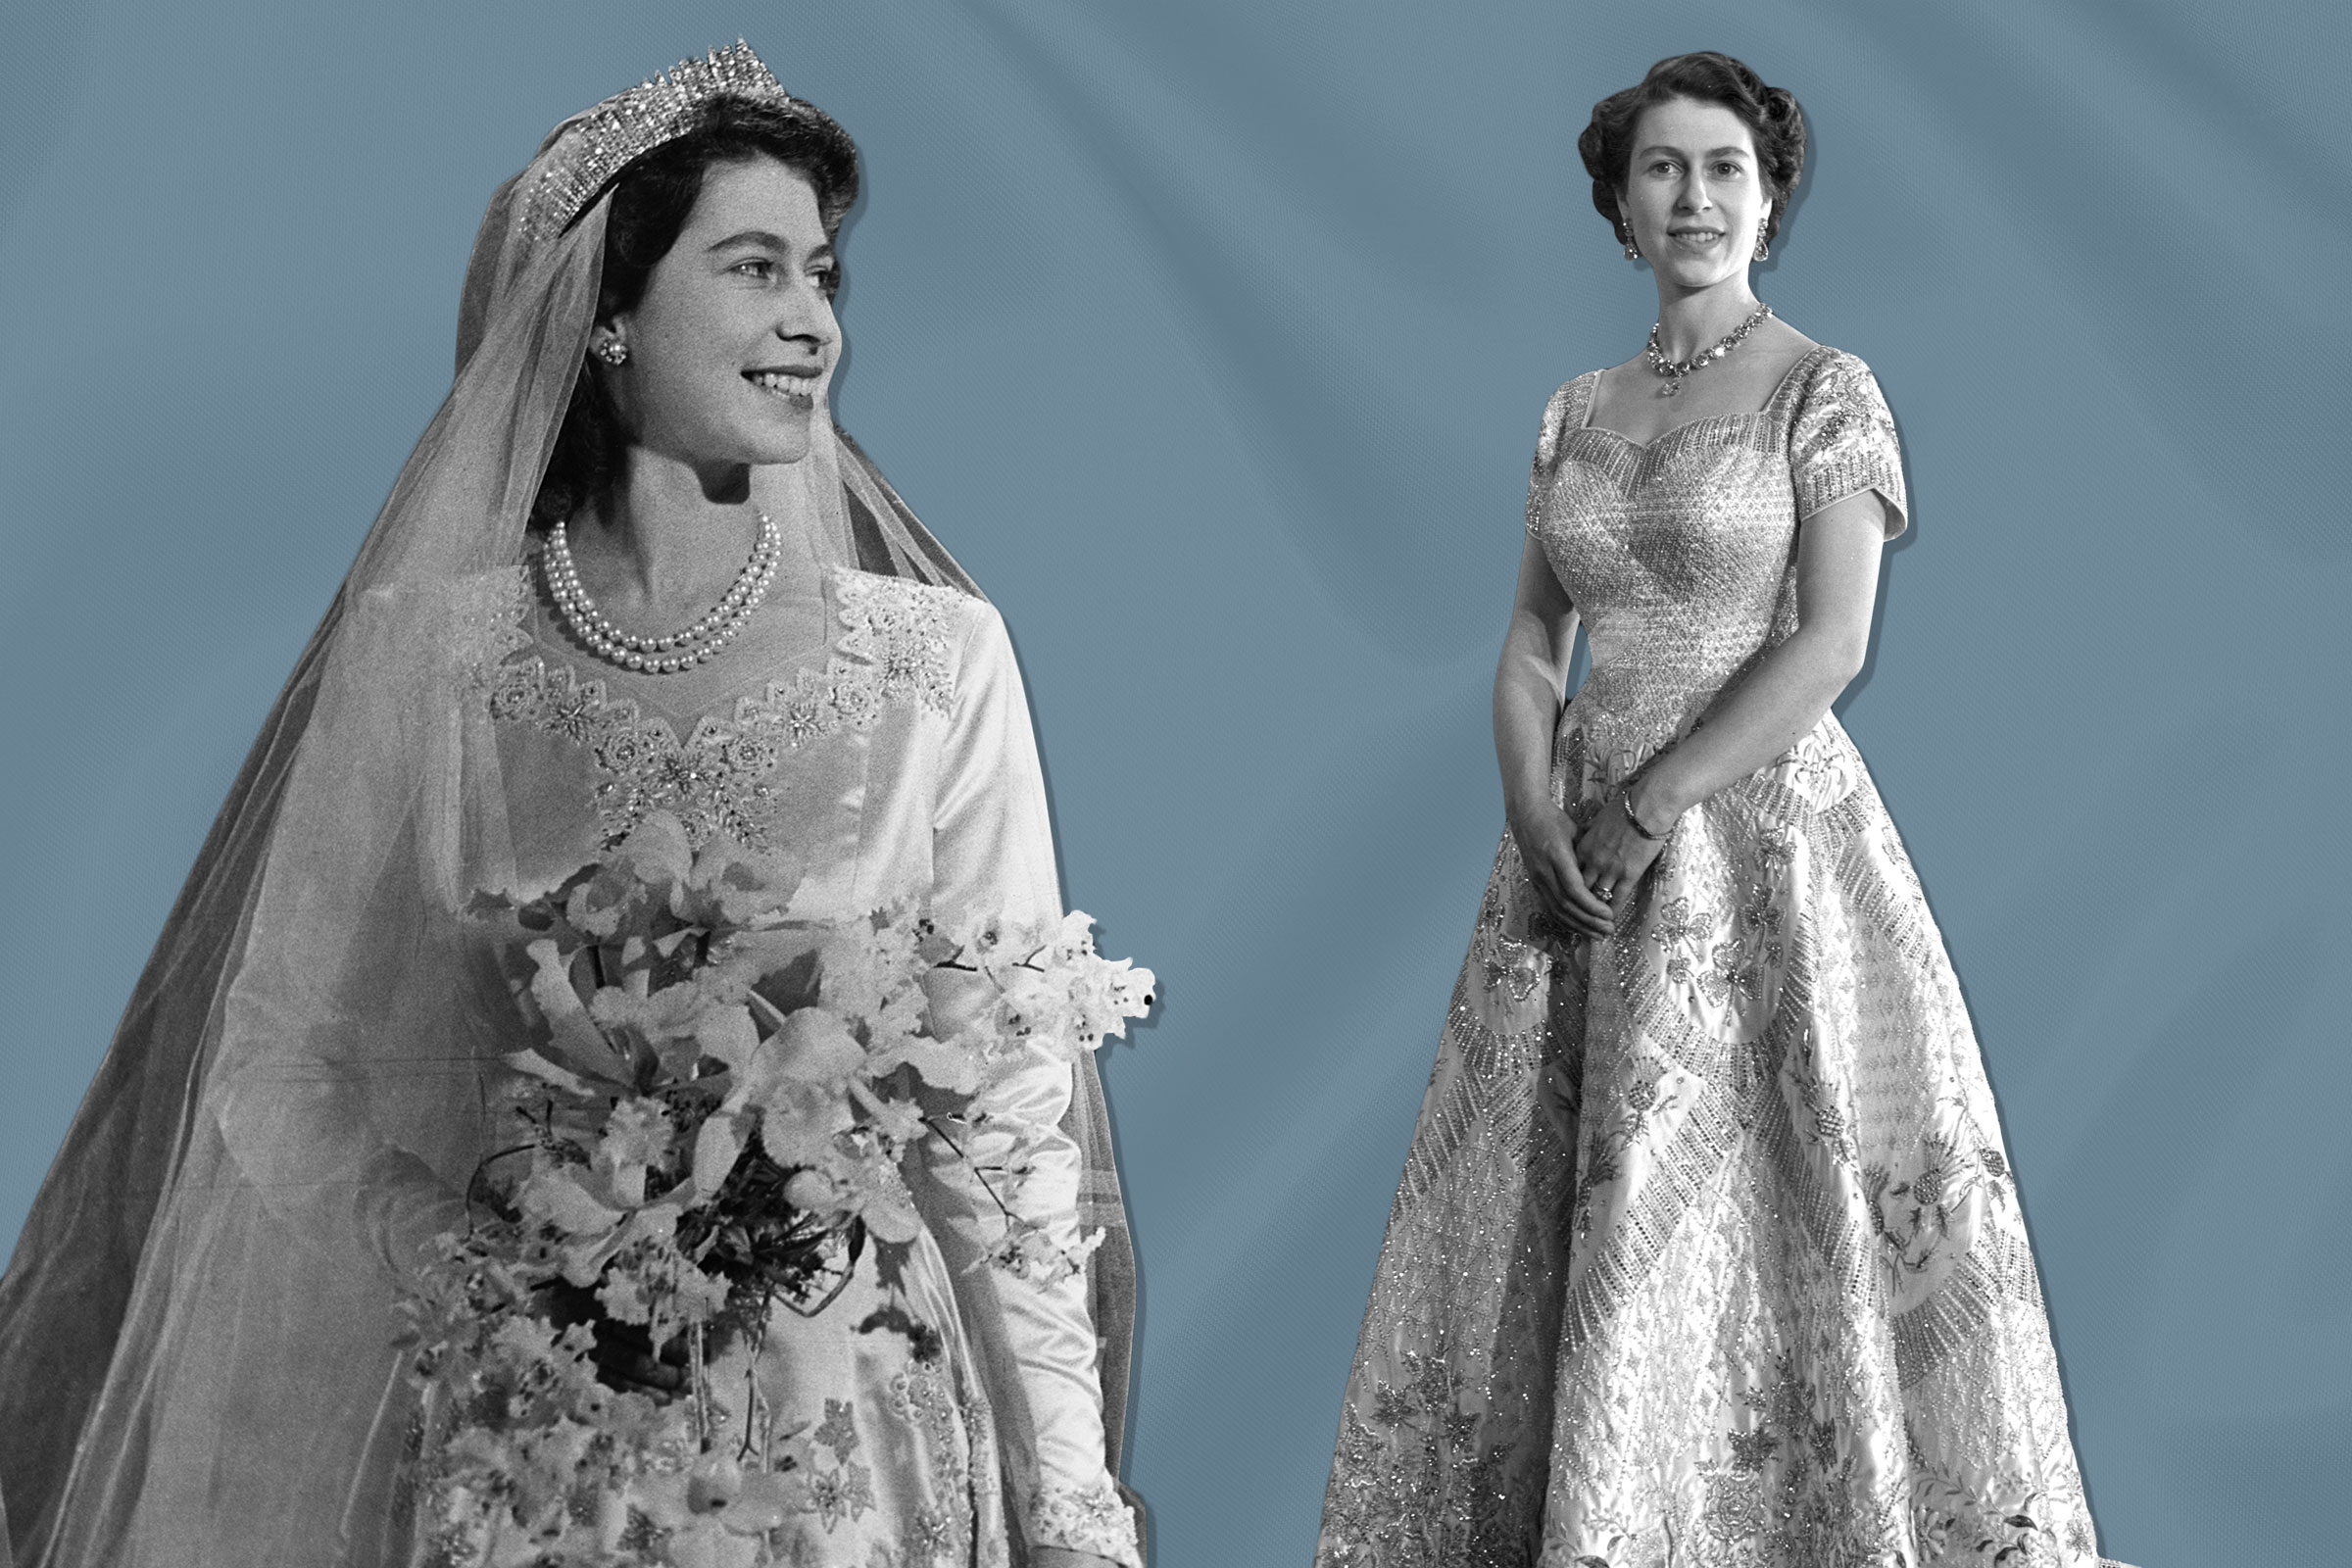 Princess Elizabeth, later Queen Elizabeth II on her wedding day in 1947; Queen Elizabeth II wearing the gown designed by Norman Hartnell for her coronation ceremony 1953 (Getty Images (3))